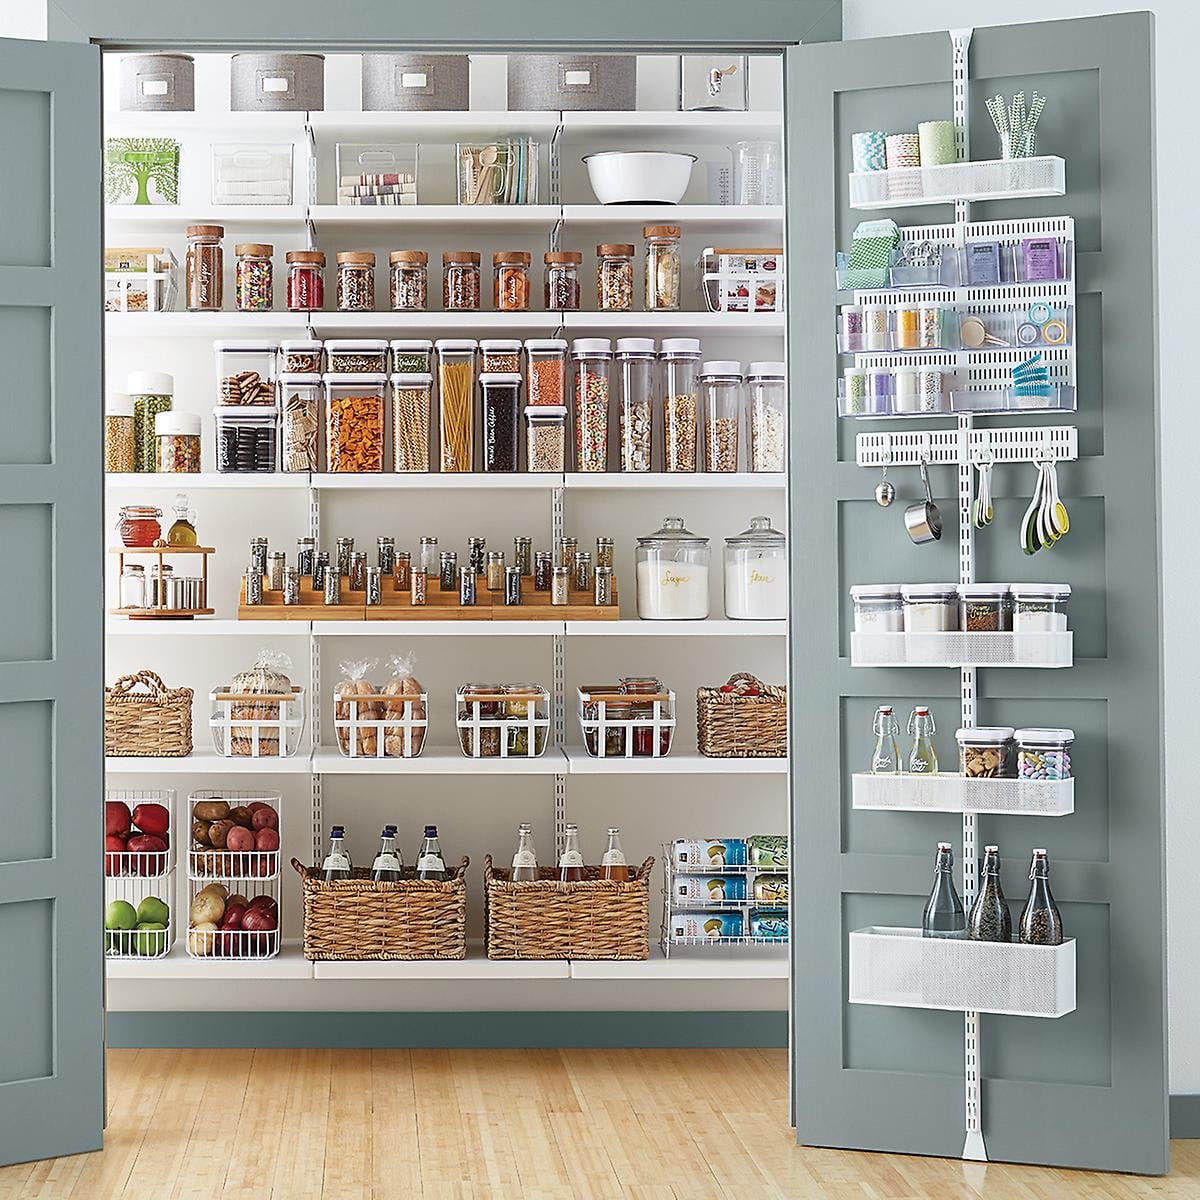 Pantry Organization with The Container Store - The Glamorous Gal